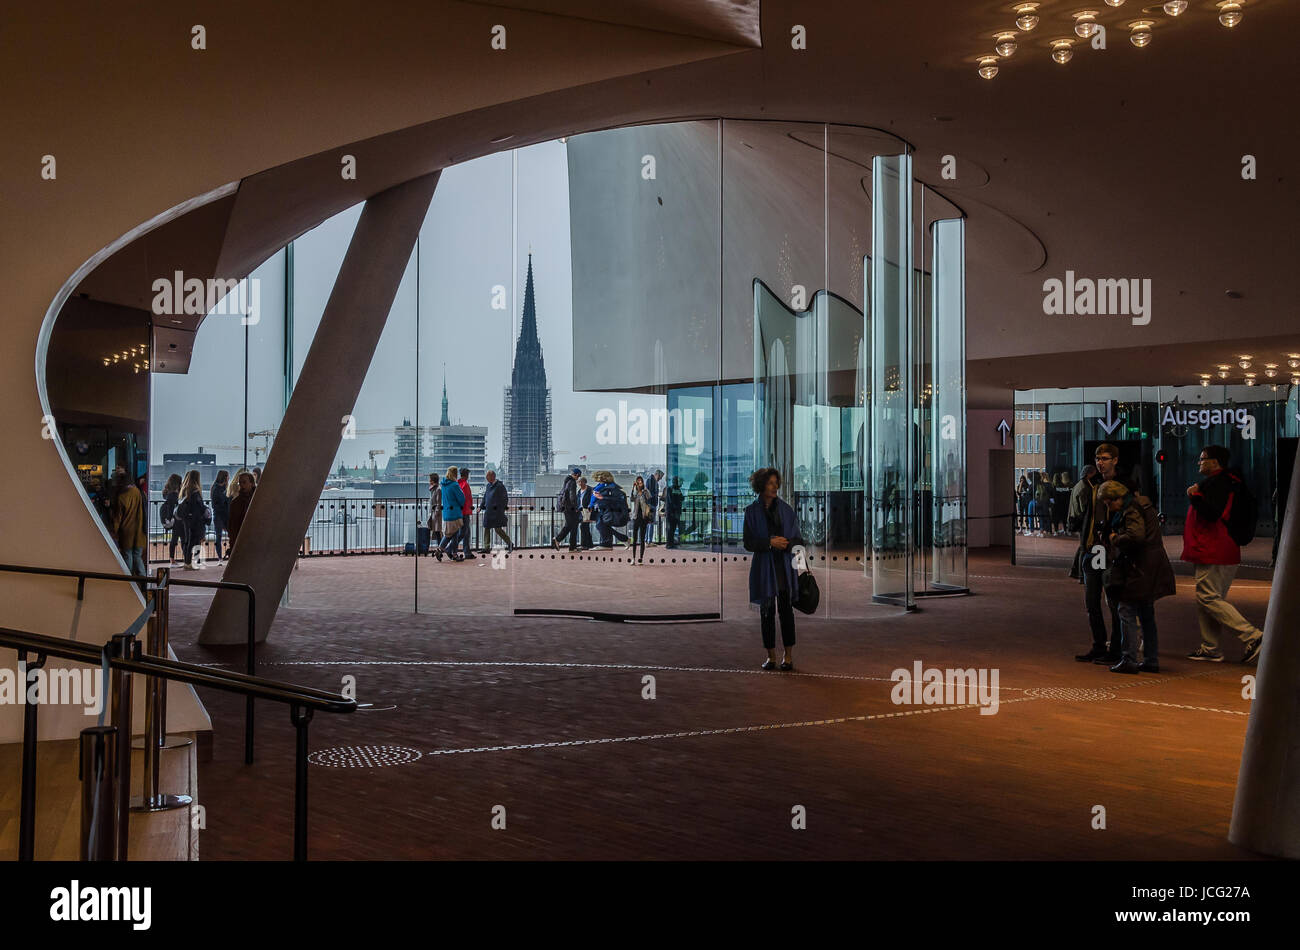 The Elbphilharmonie is a concert hall in the HafenCity quarter of Hamburg, Germany, on the Grasbrook (de) peninsula of the Elbe River. Stock Photo